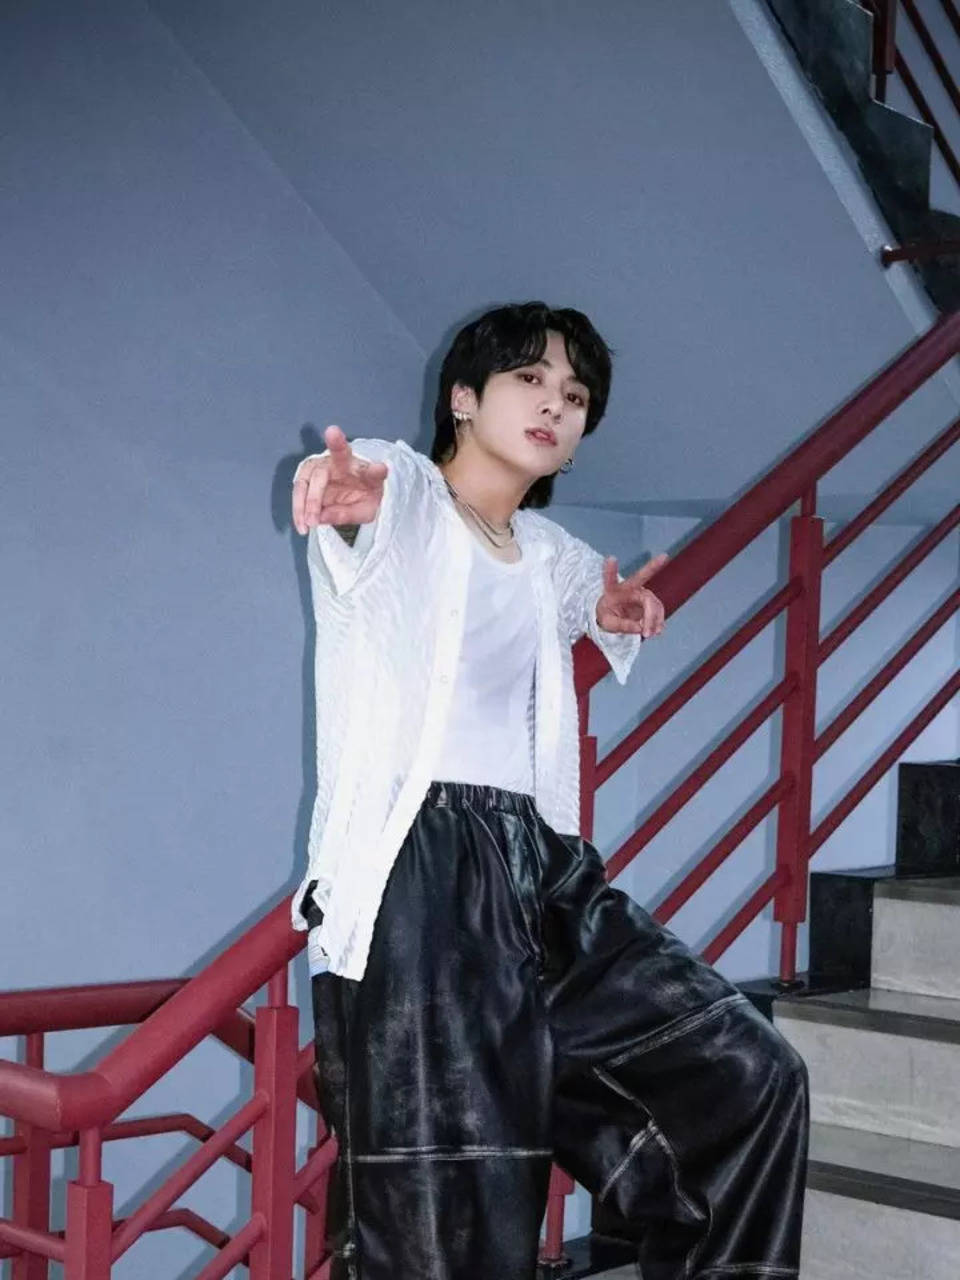 10 style lessons to take from Jungkook